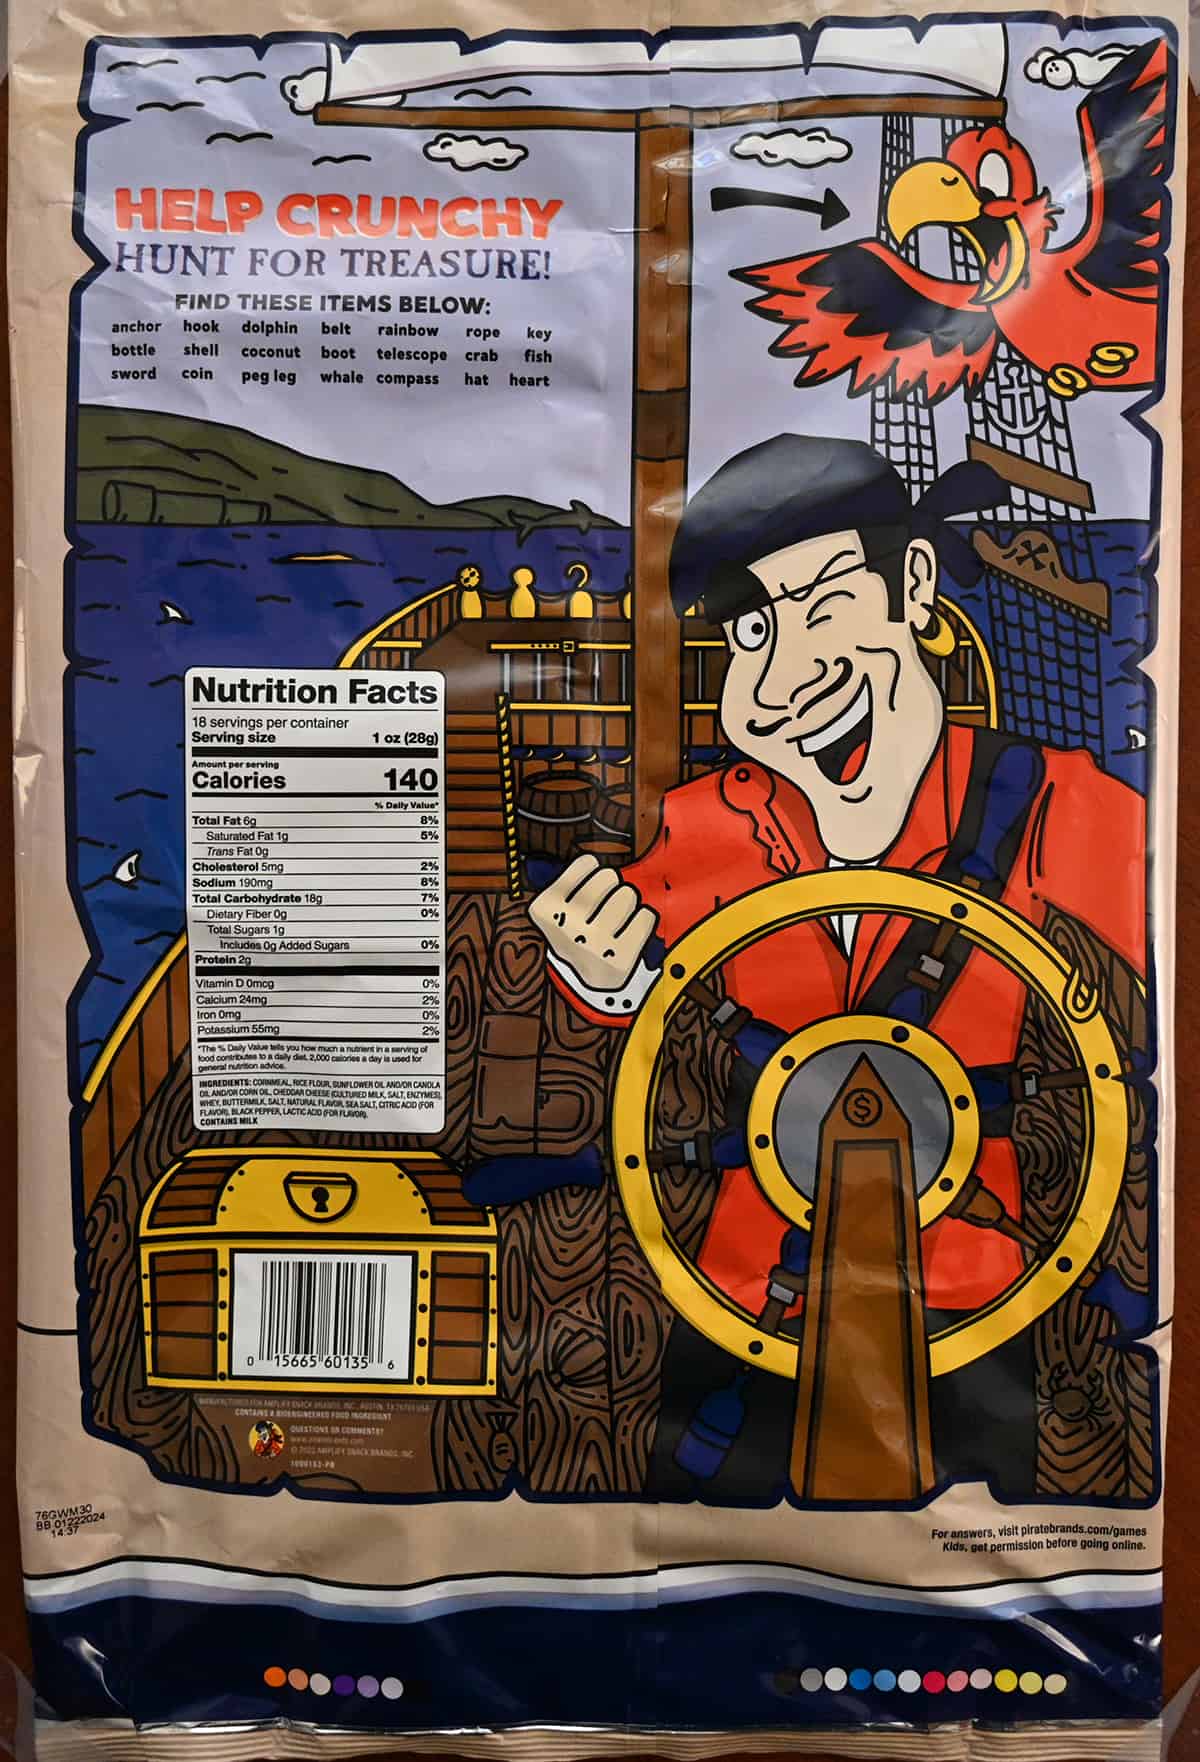 Image of the back of the bag of Pirate's Booty showing nutrition facts and a treasure hunt on the back of the bag.